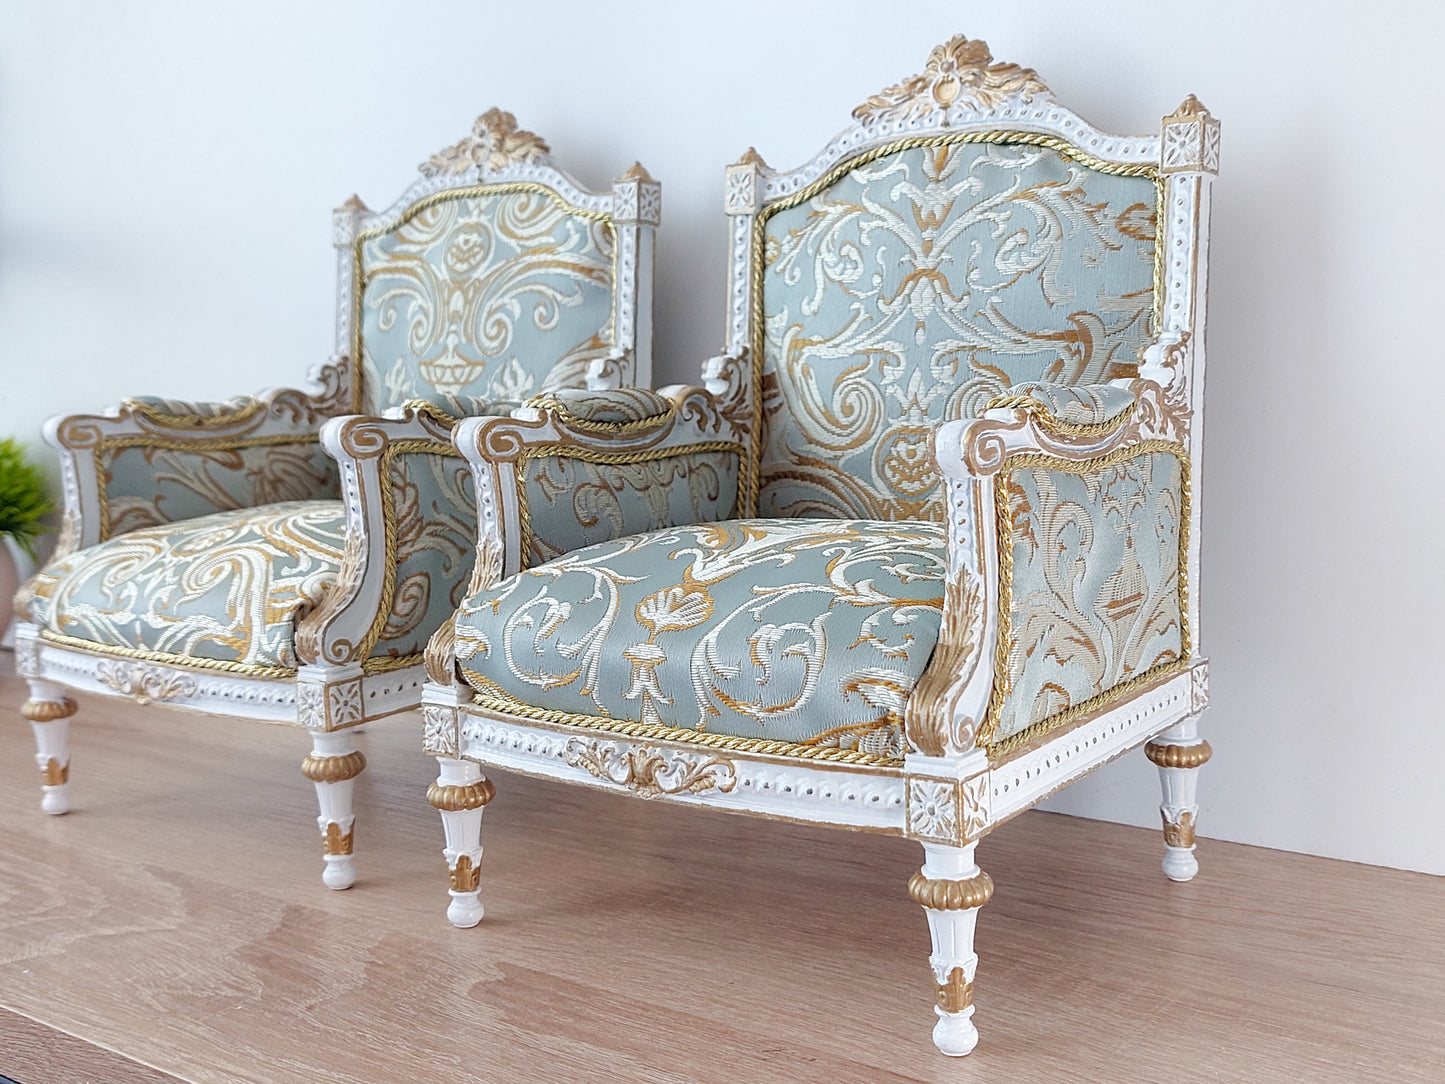 Reserved - 1/4 classic armchair white & pale blue Louis XVI style, 2 pcs